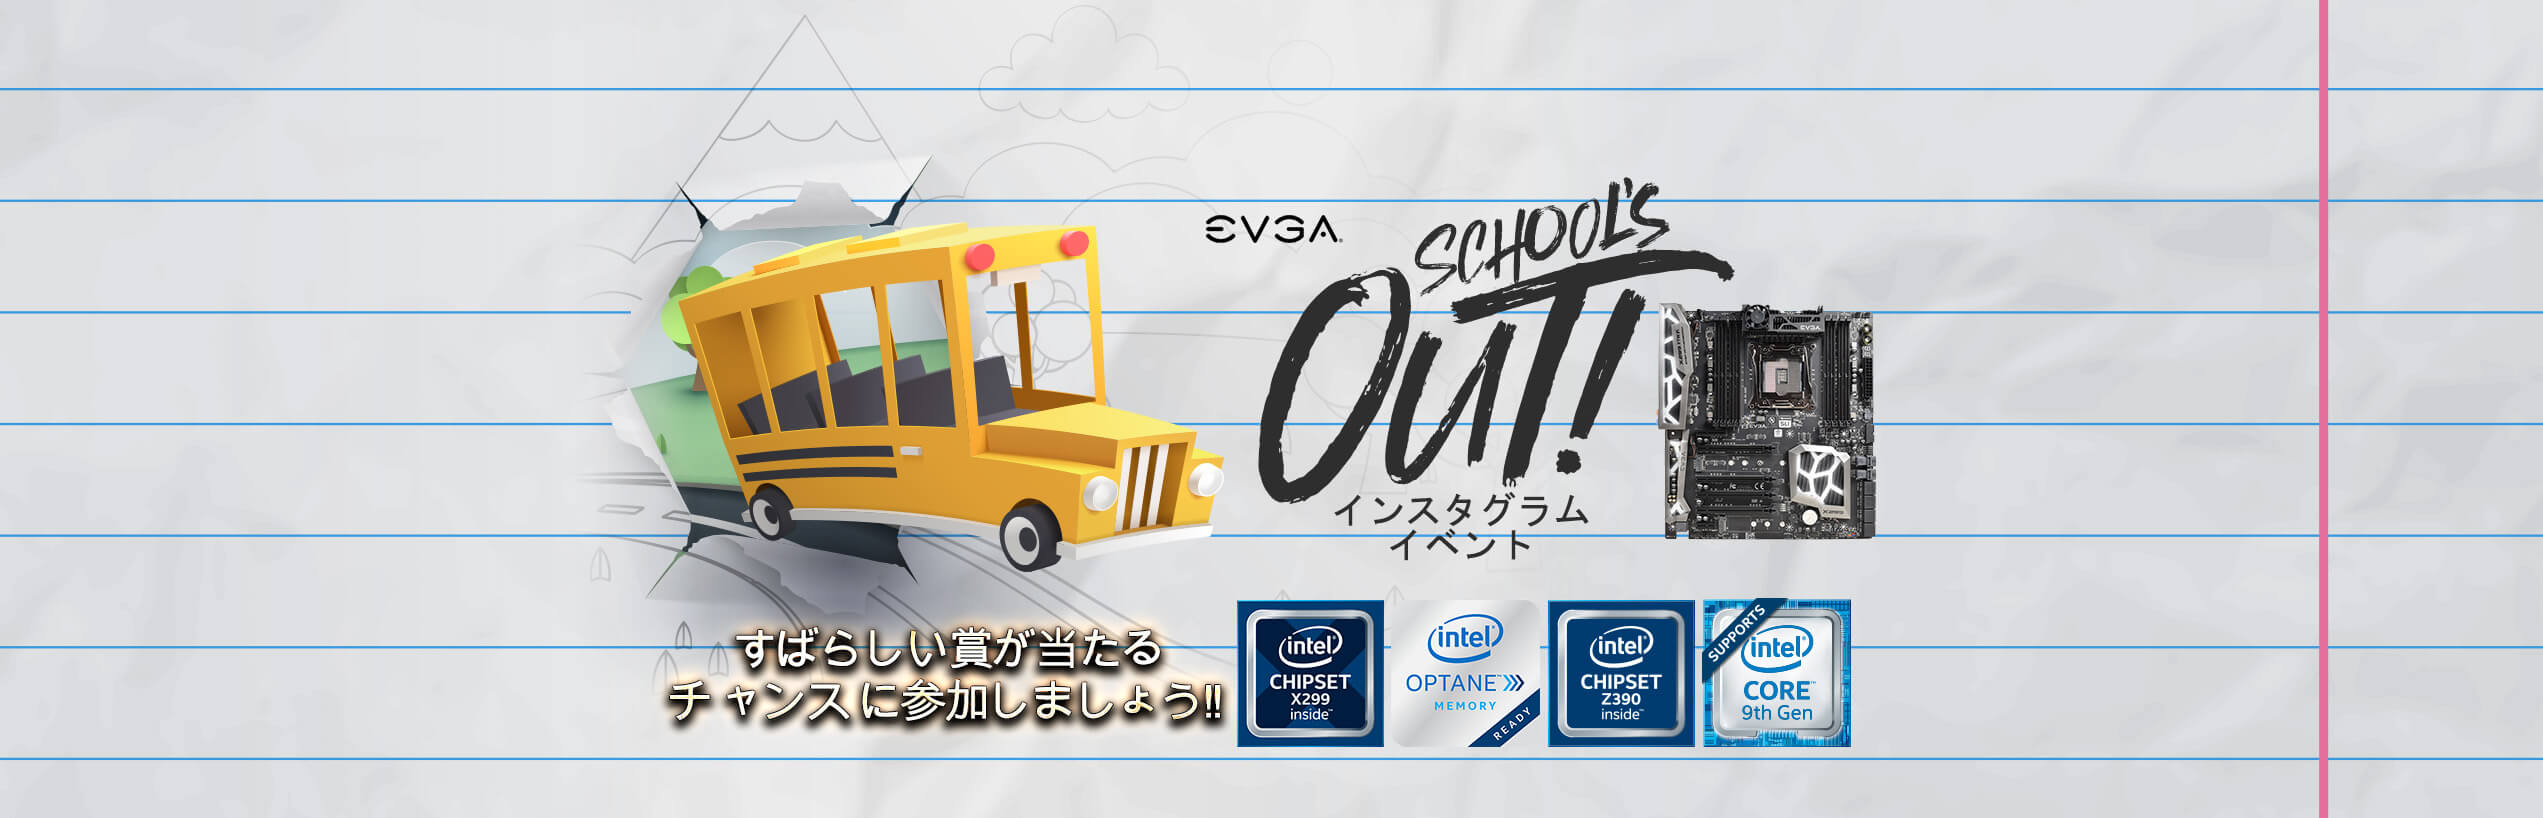 EVGA School's Out